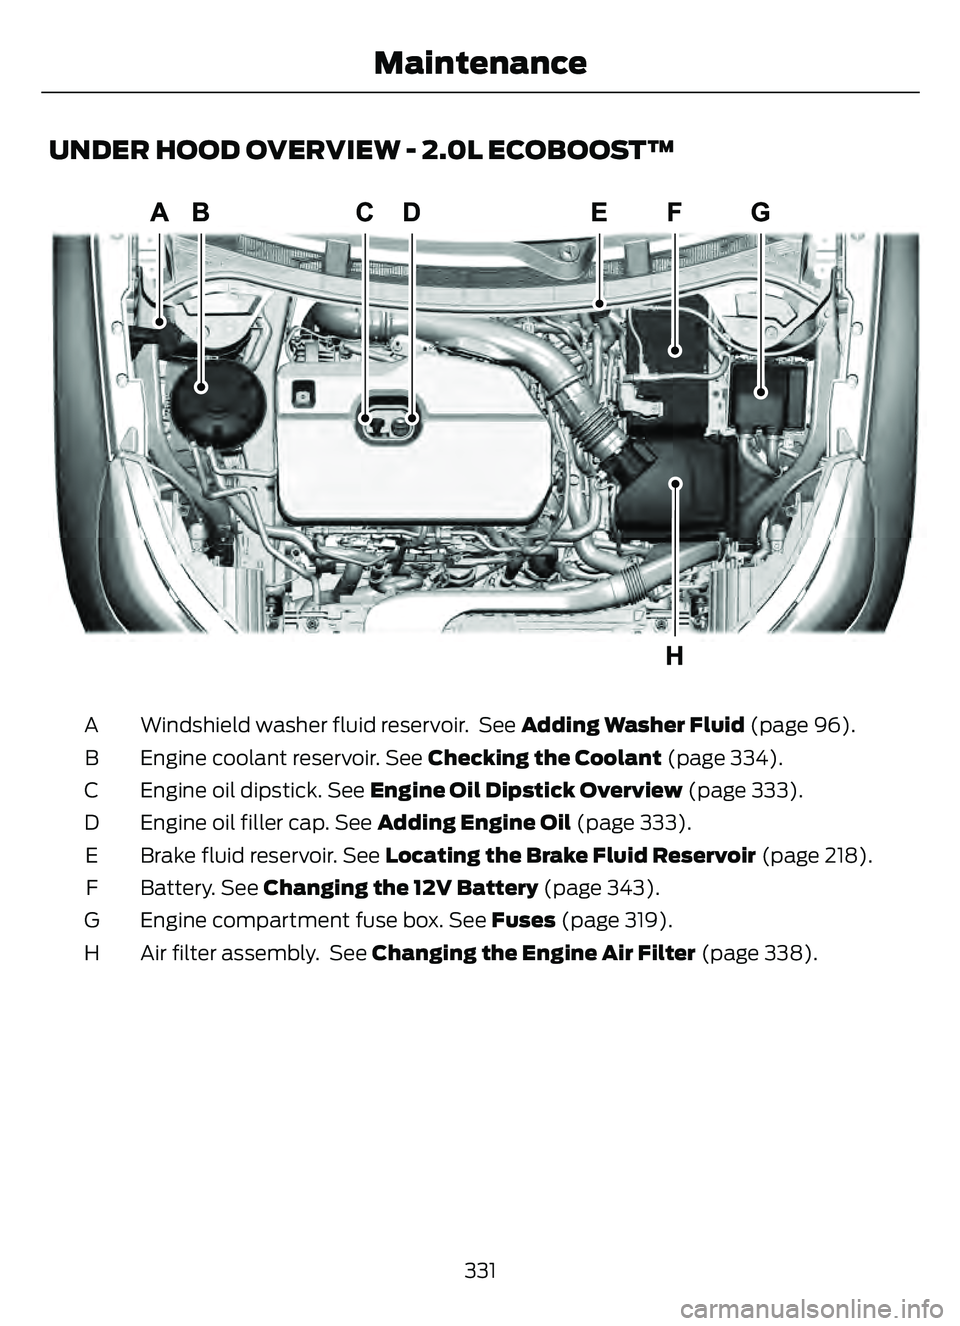 FORD ESCAPE 2022 User Guide UNDER HOOD OVERVIEW - 2.0L ECOBOOST™
30 05E307705
Windshield washer fluid reservoir.  See Adding Washer Fluid (page 96).
A
Engine coolant reservoir. See  Checking the Coolant (page 334).
B
Engine oi